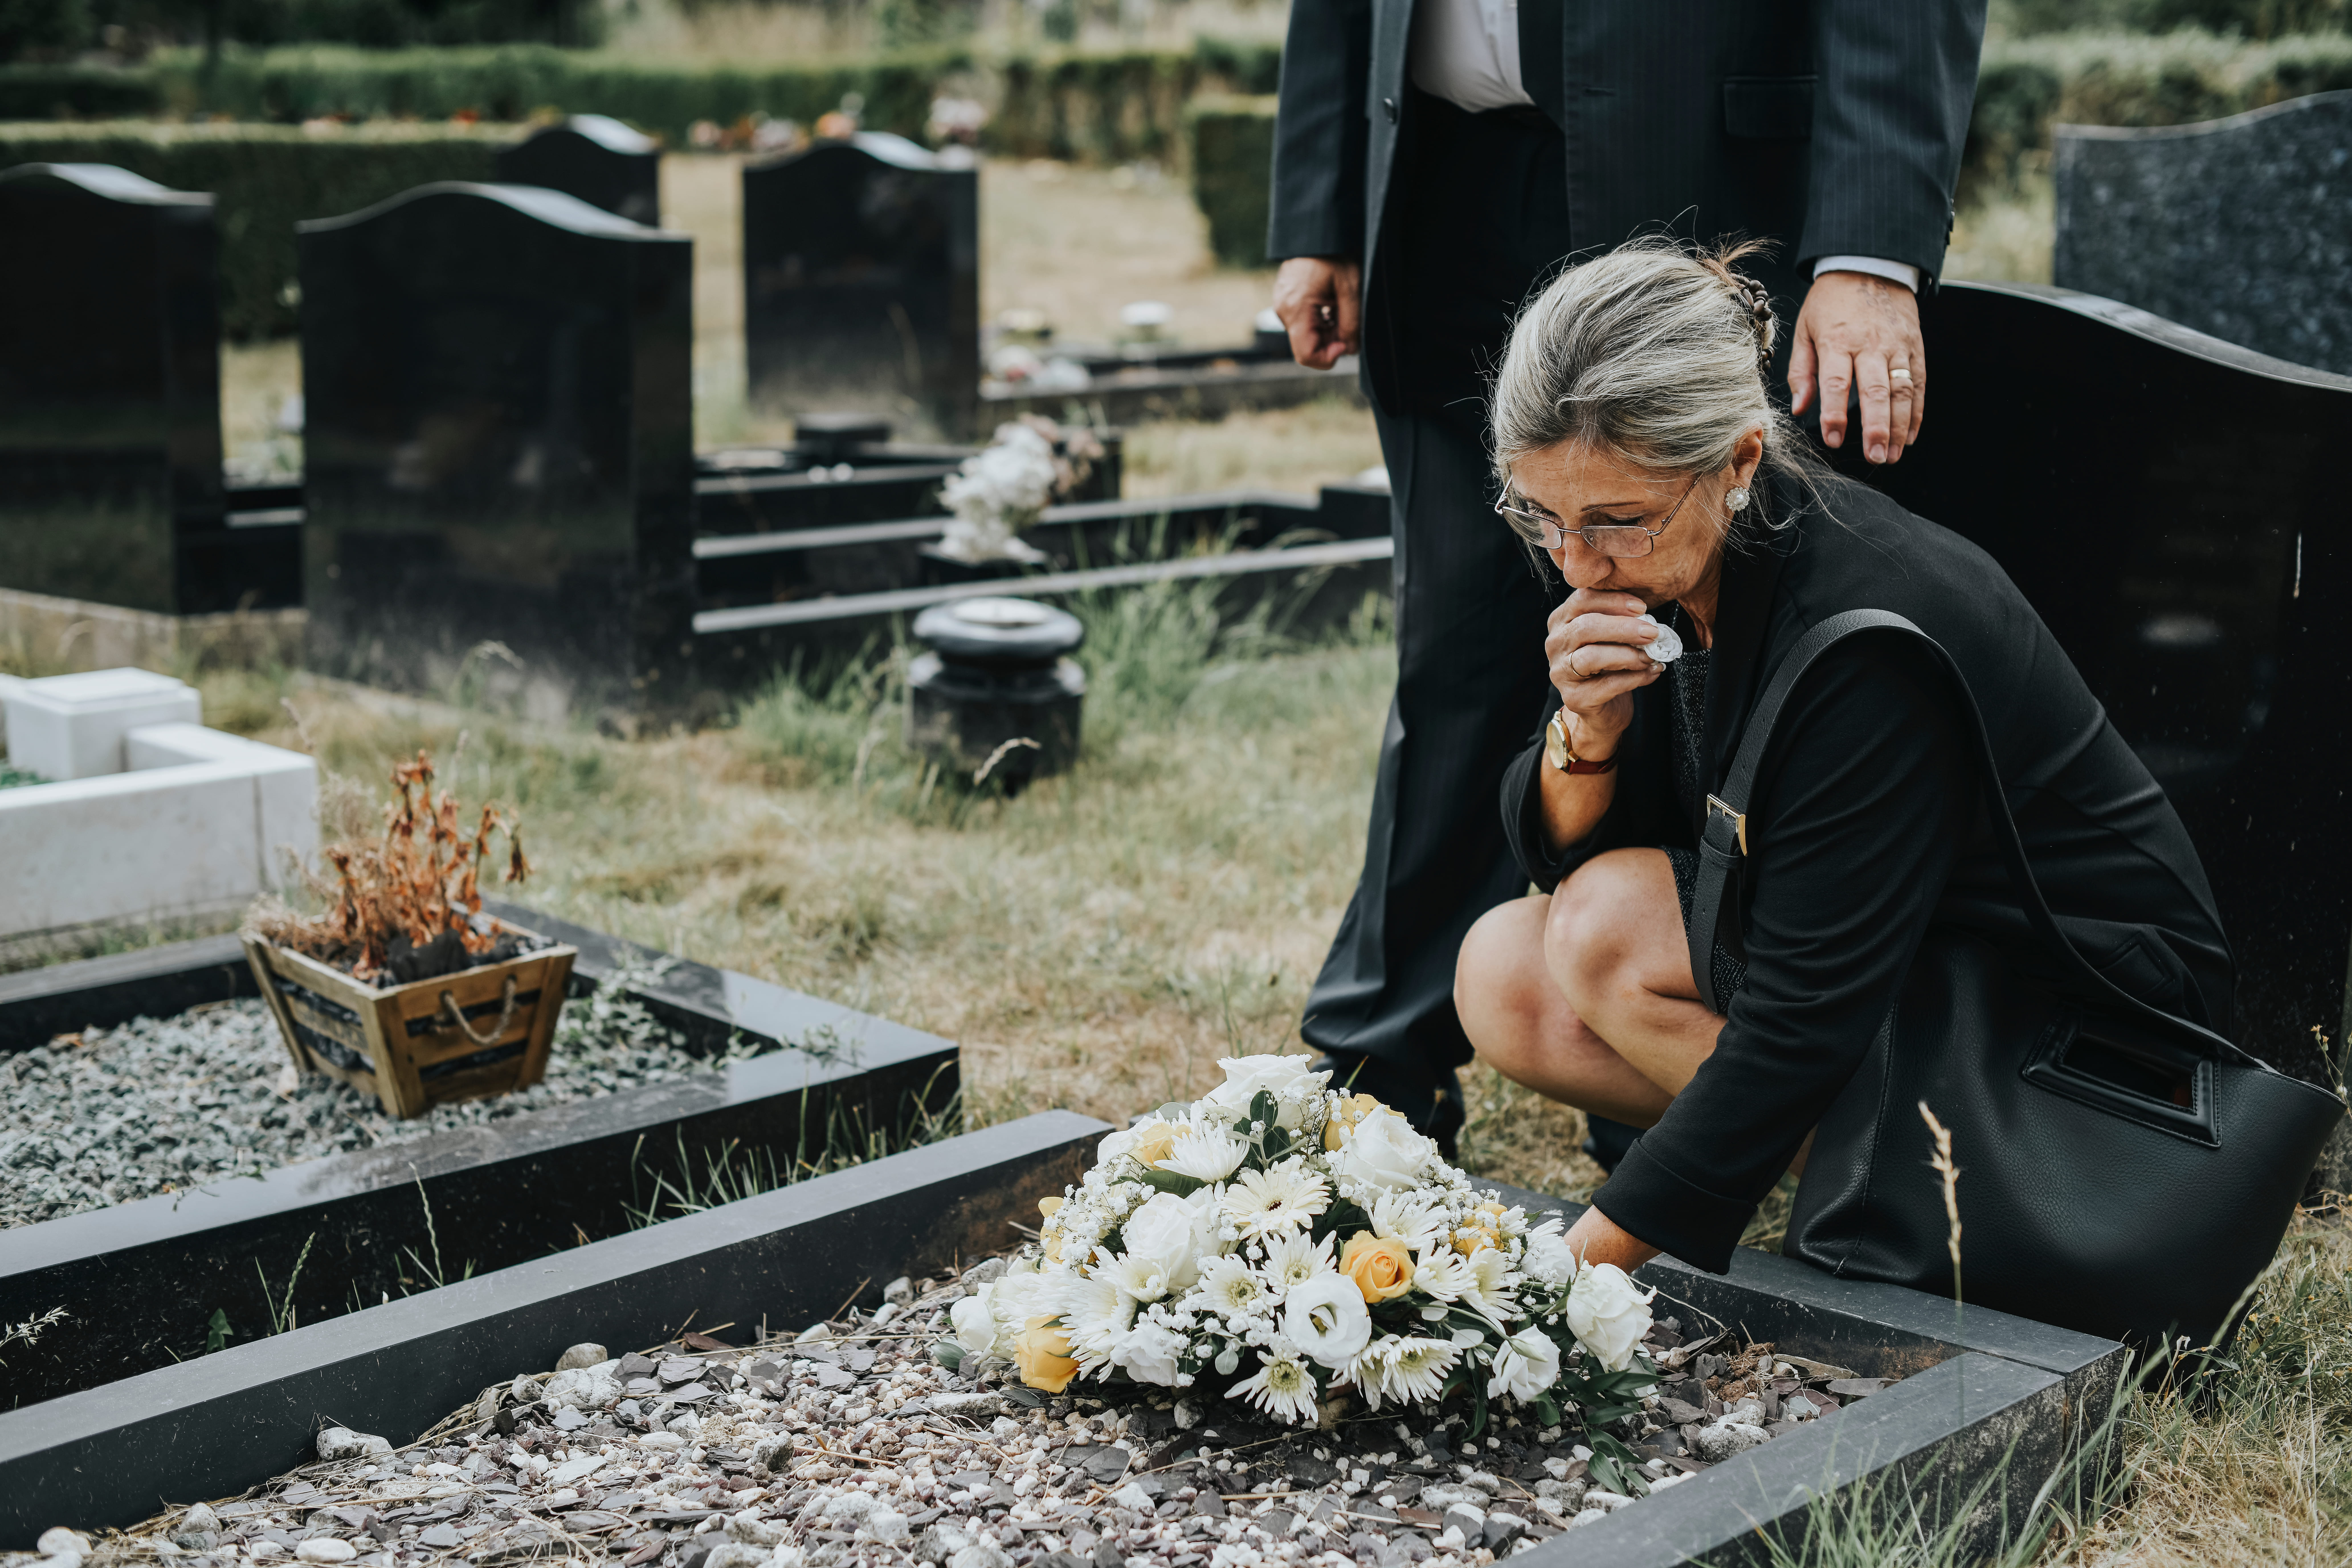 Senior woman placing flowers on a grave | Source: Shutterstock